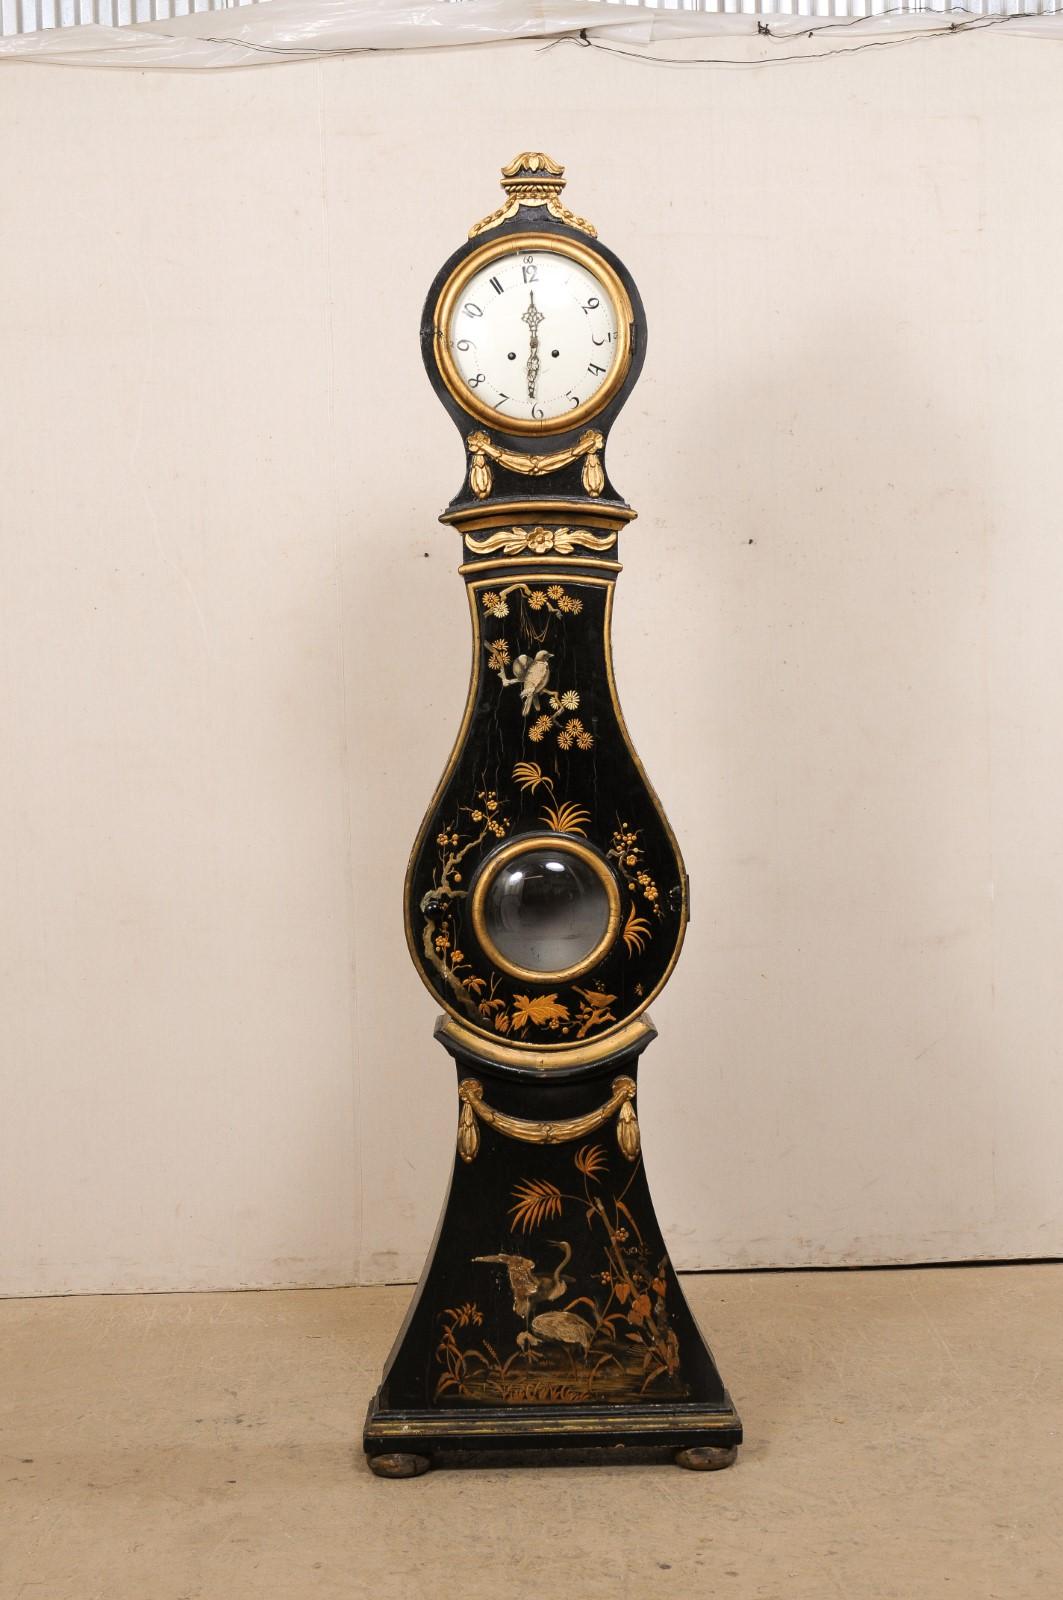 An elegant Swedish grandfather clock adorn with a distinctive chinoiserie nature inspired design from the early 19th century. This antique floor clock from Sweden is loaded with decorative chinoiserie throughout, in a playful nature motif of cranes,